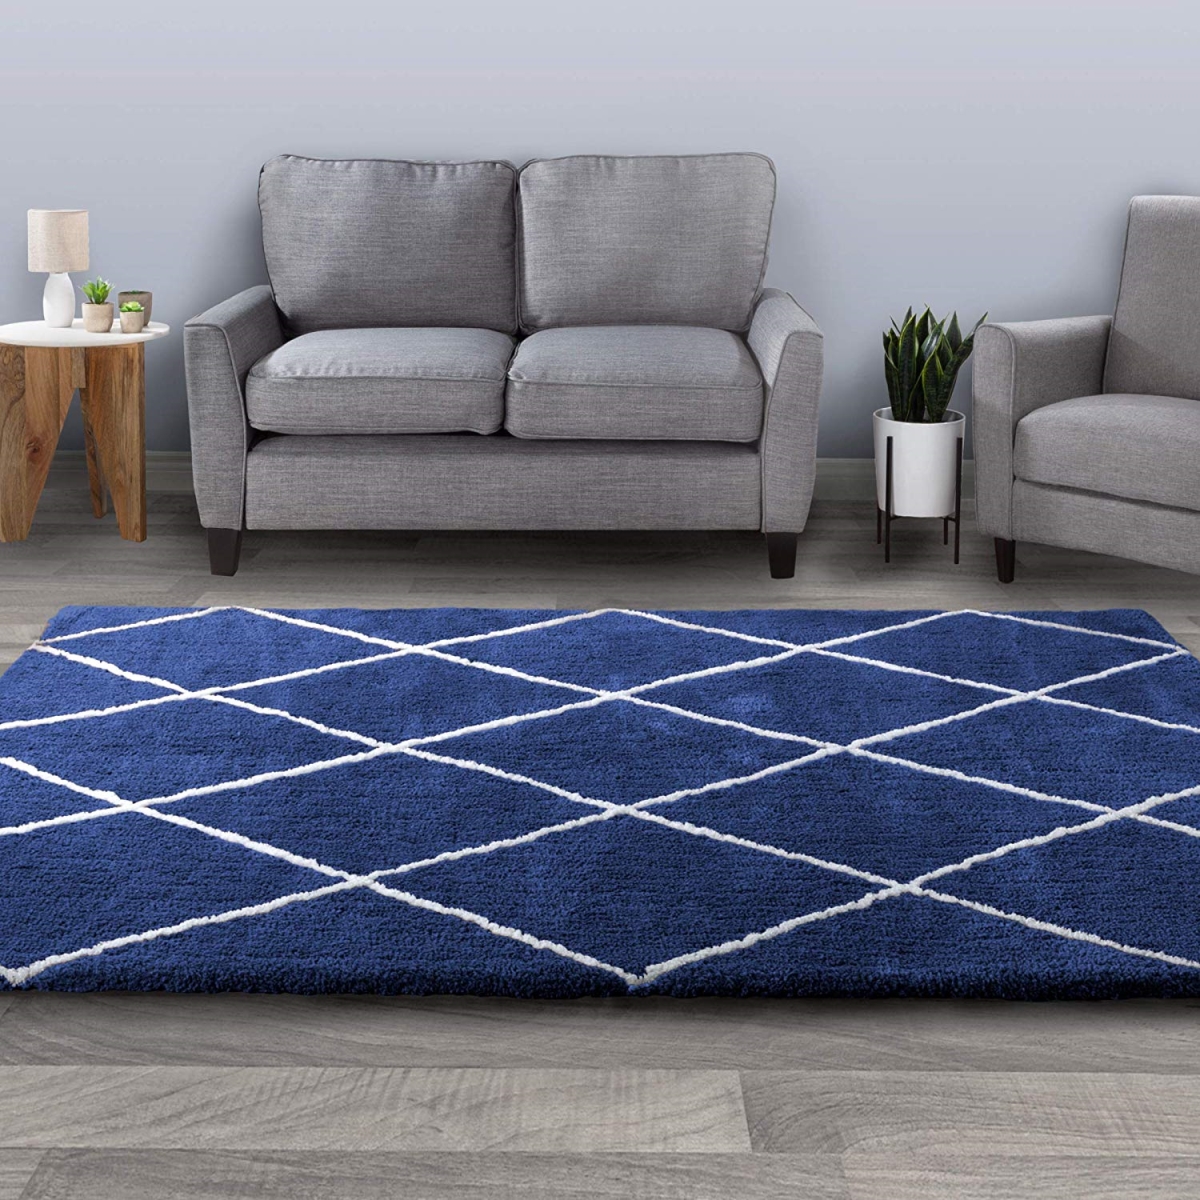 62a-64319 5 Ft. 3 In. X 7 Ft. 7 In. Diamond Shag Area Rug-plush Pattern Carpet, Navy & Ivory